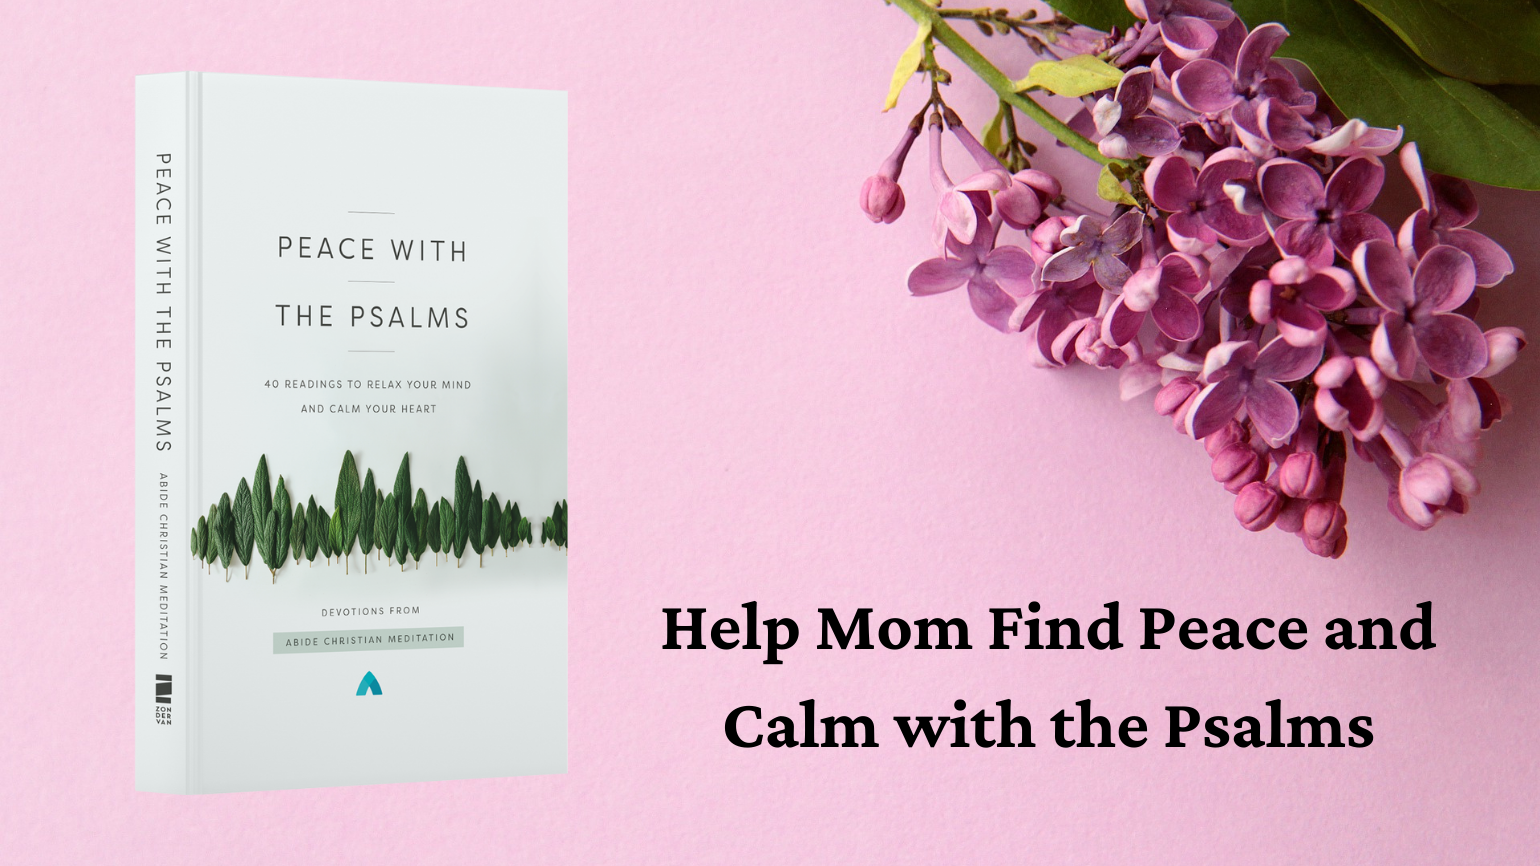 Peace with the Psalms (Abide) spiritual faith based mothers day gifts